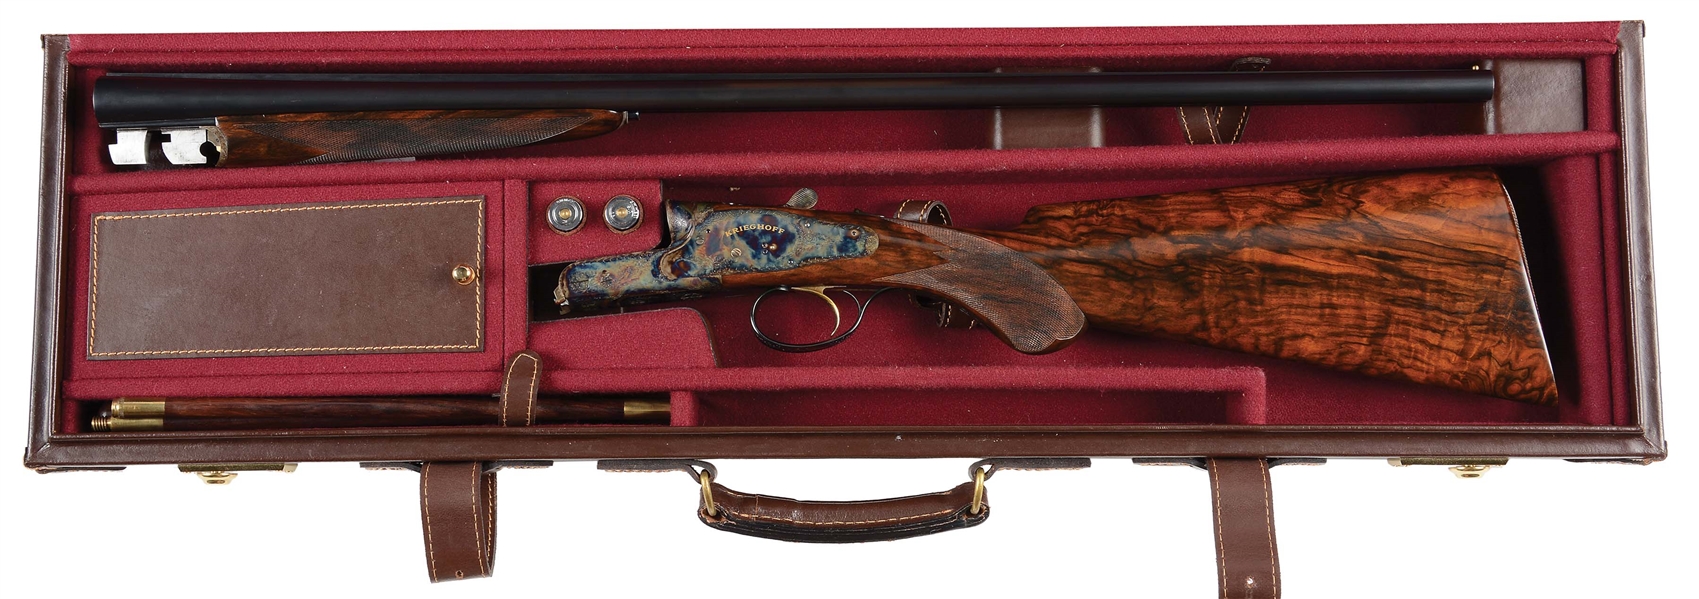 (M) CASED KREIGHOFF ESSENCIA 28 BORE SIDELOCK SHOTGUN WITH CASE - ONCE OWNED BY FAMED COLLECTOR ROBERT PETERSEN.